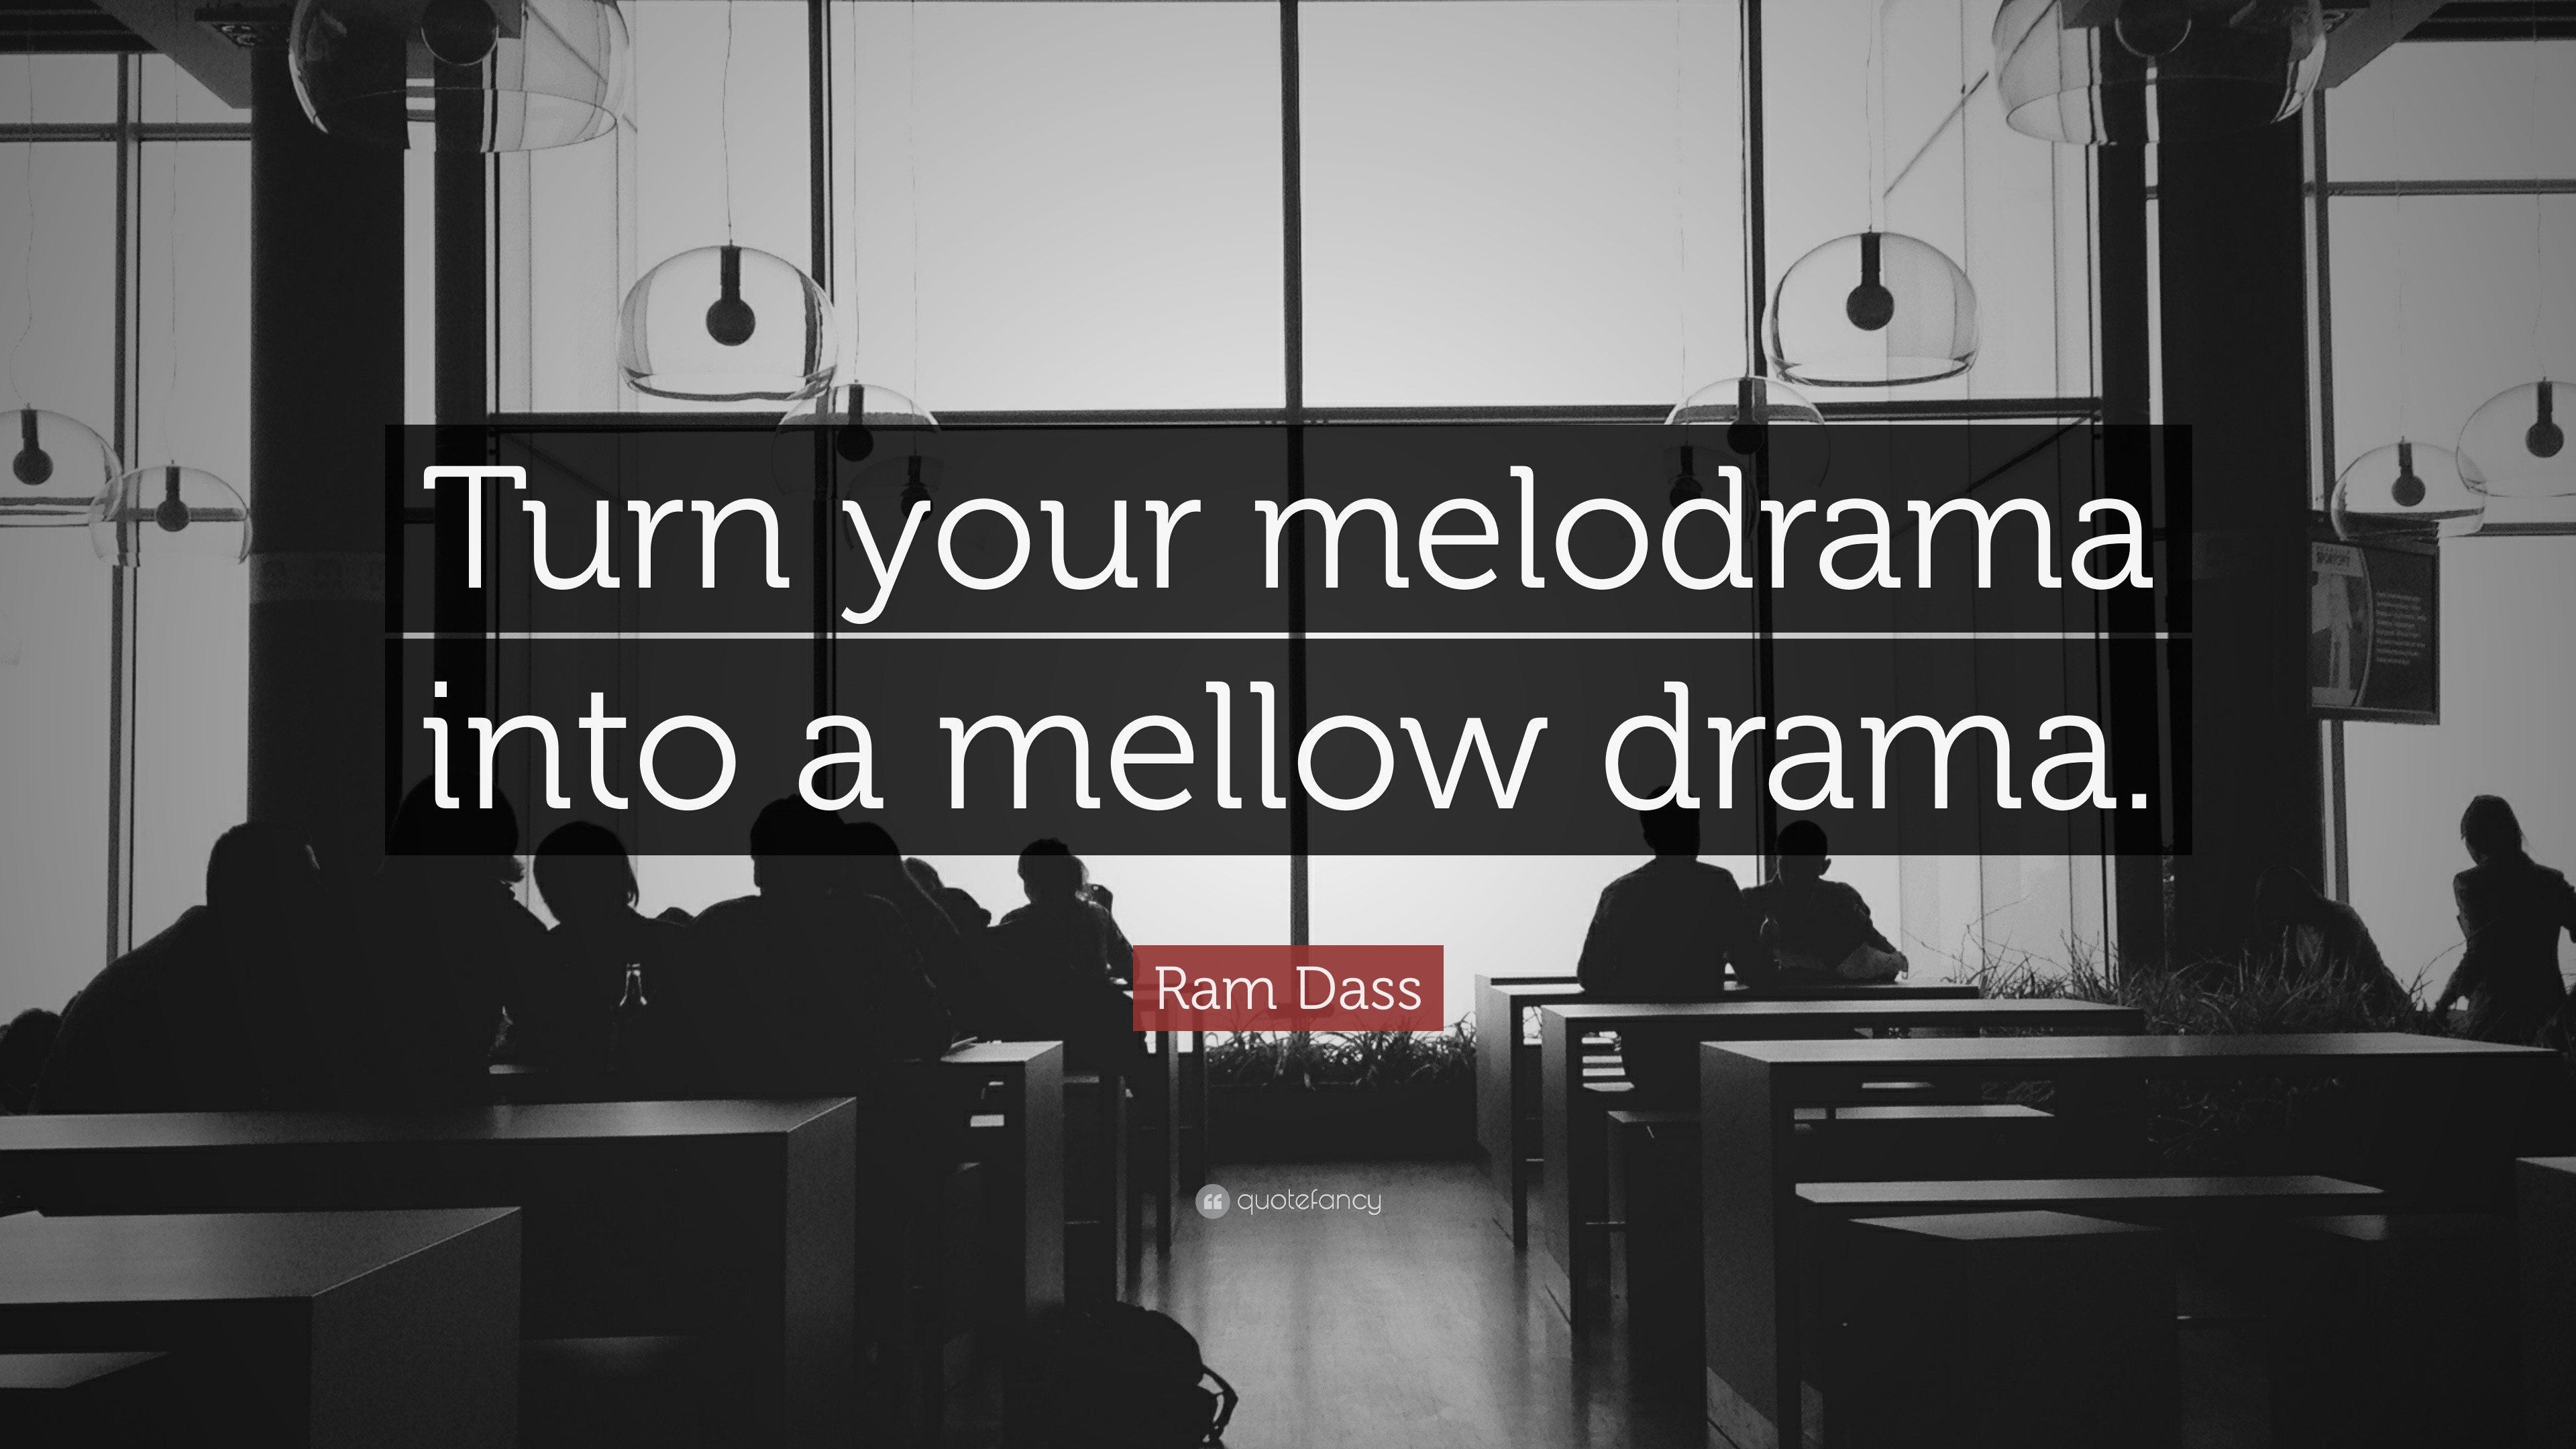 Ram Dass Quote: “Turn your melodrama into a mellow drama.”